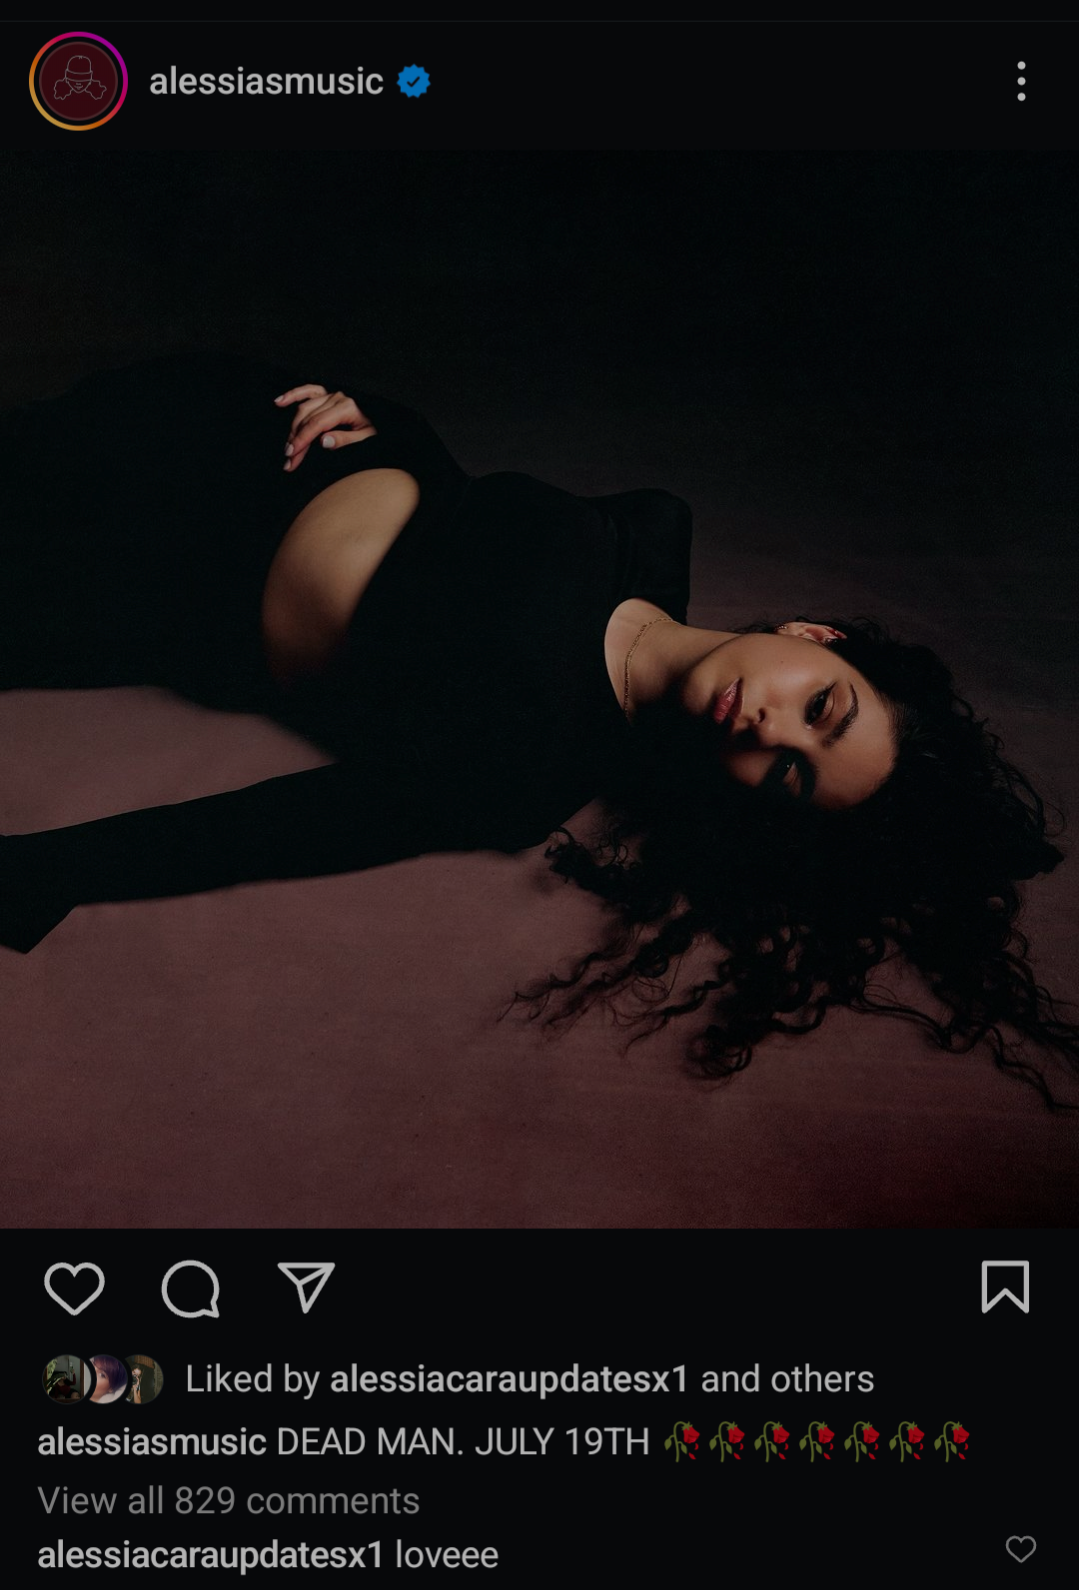 Alessia Cara Instagram post with the message Dead Man 19 July.

The photo depicts Alessia, in a black top, laying down on a reddish-brown rug.